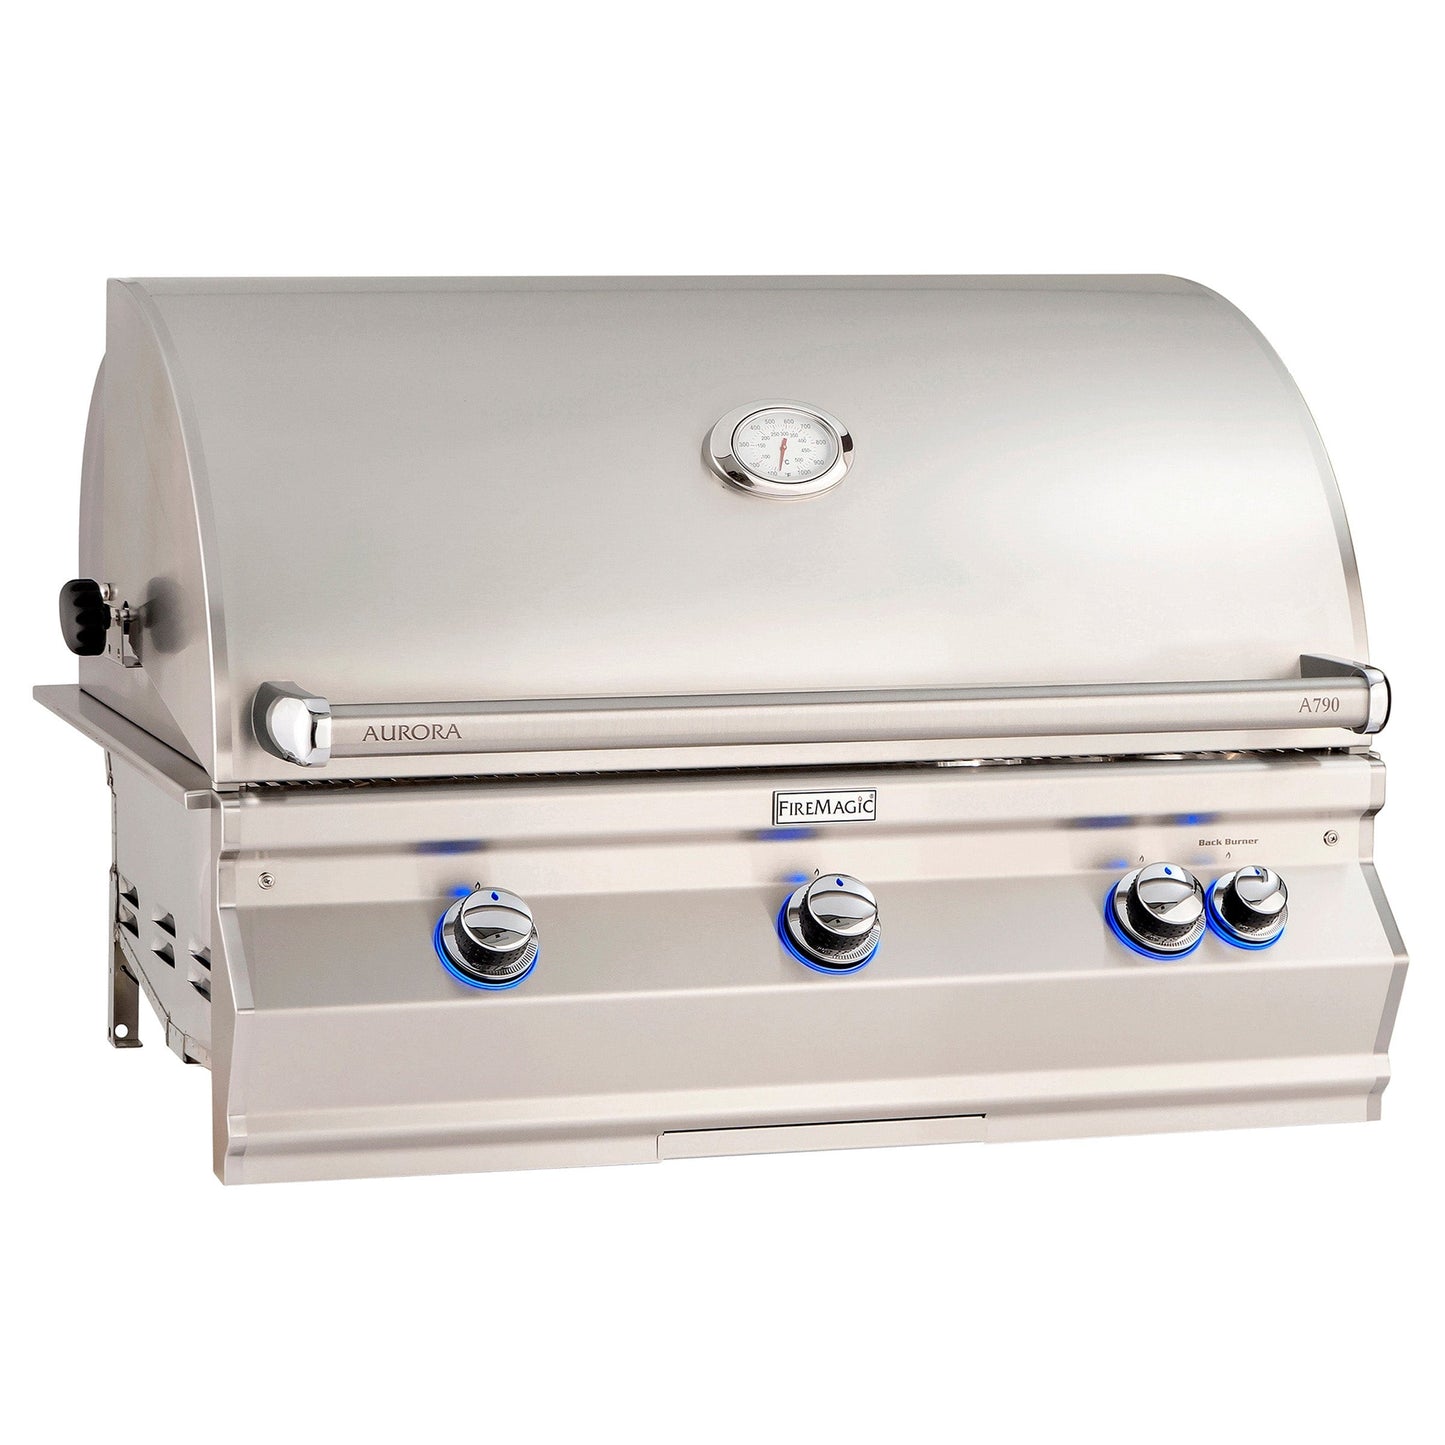 Fire Magic Built-In Grill Without Window / Natural Gas Fire Magic - Aurora A790i 36" Built-In Grill With Analog Thermometer Without Backburner - Natural Gas / Liquid Propane